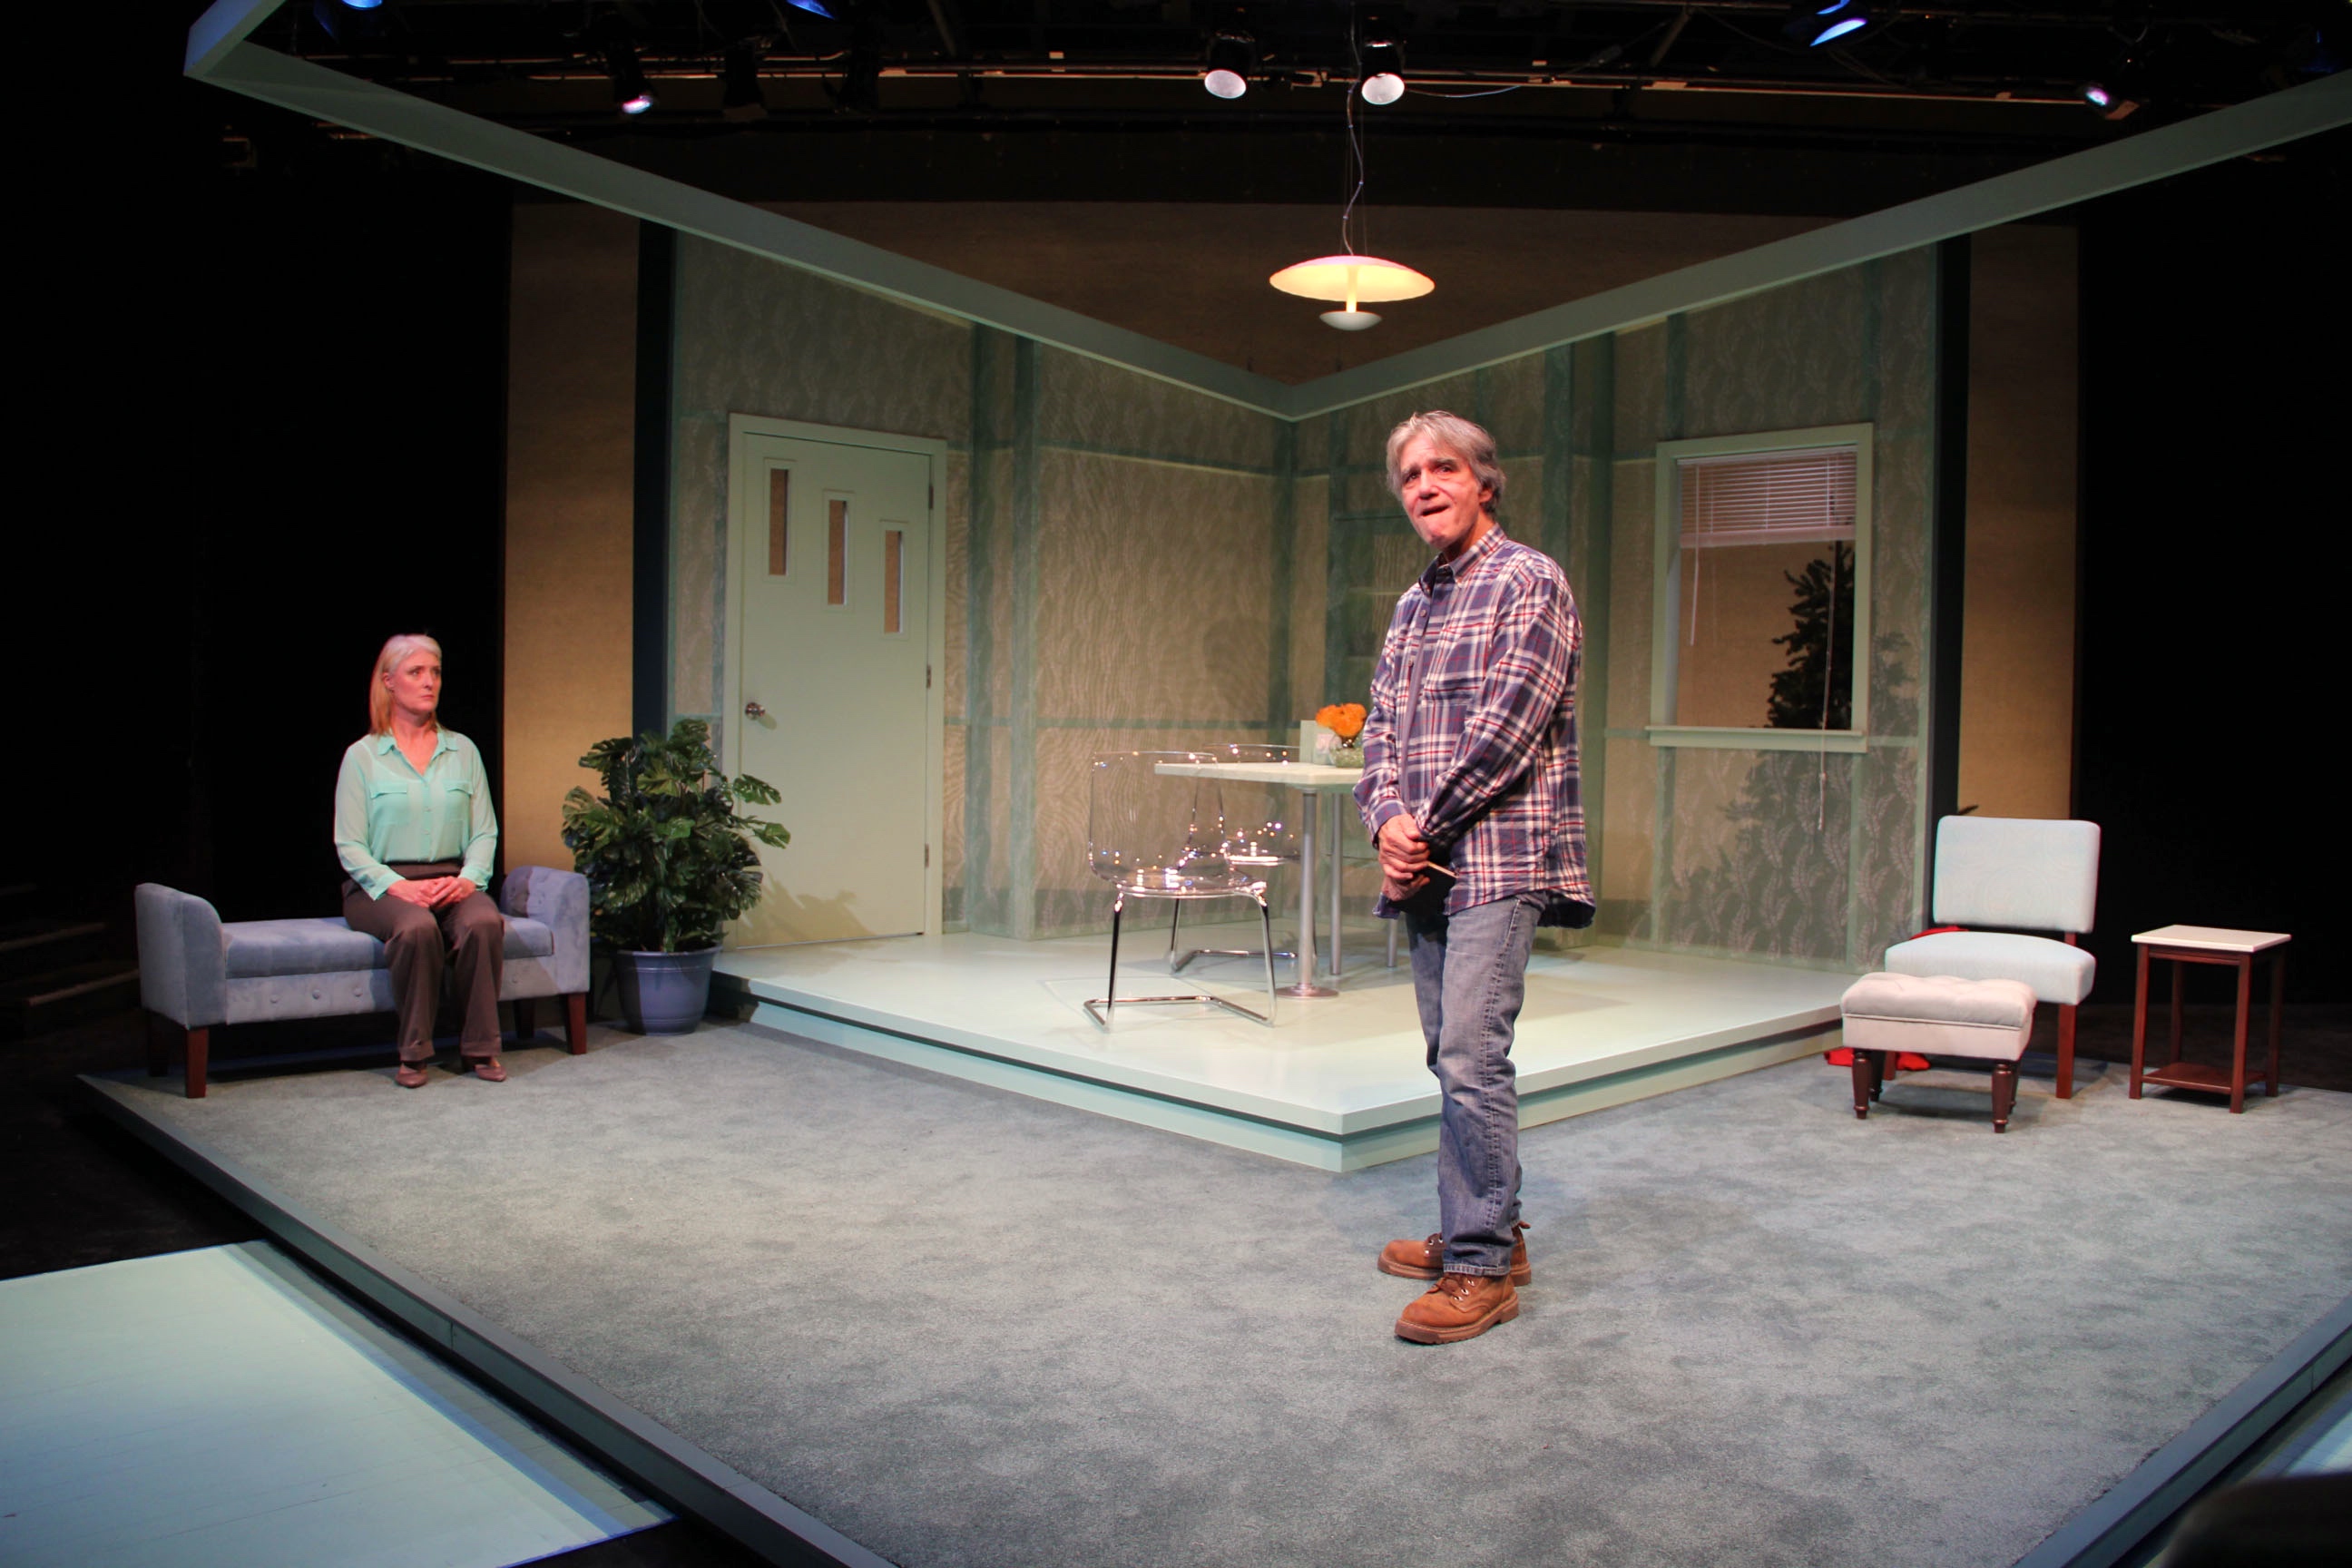 Oregon Contemporary Theatre takes a trip into the not-so-distant future with “Marjorie Prime”